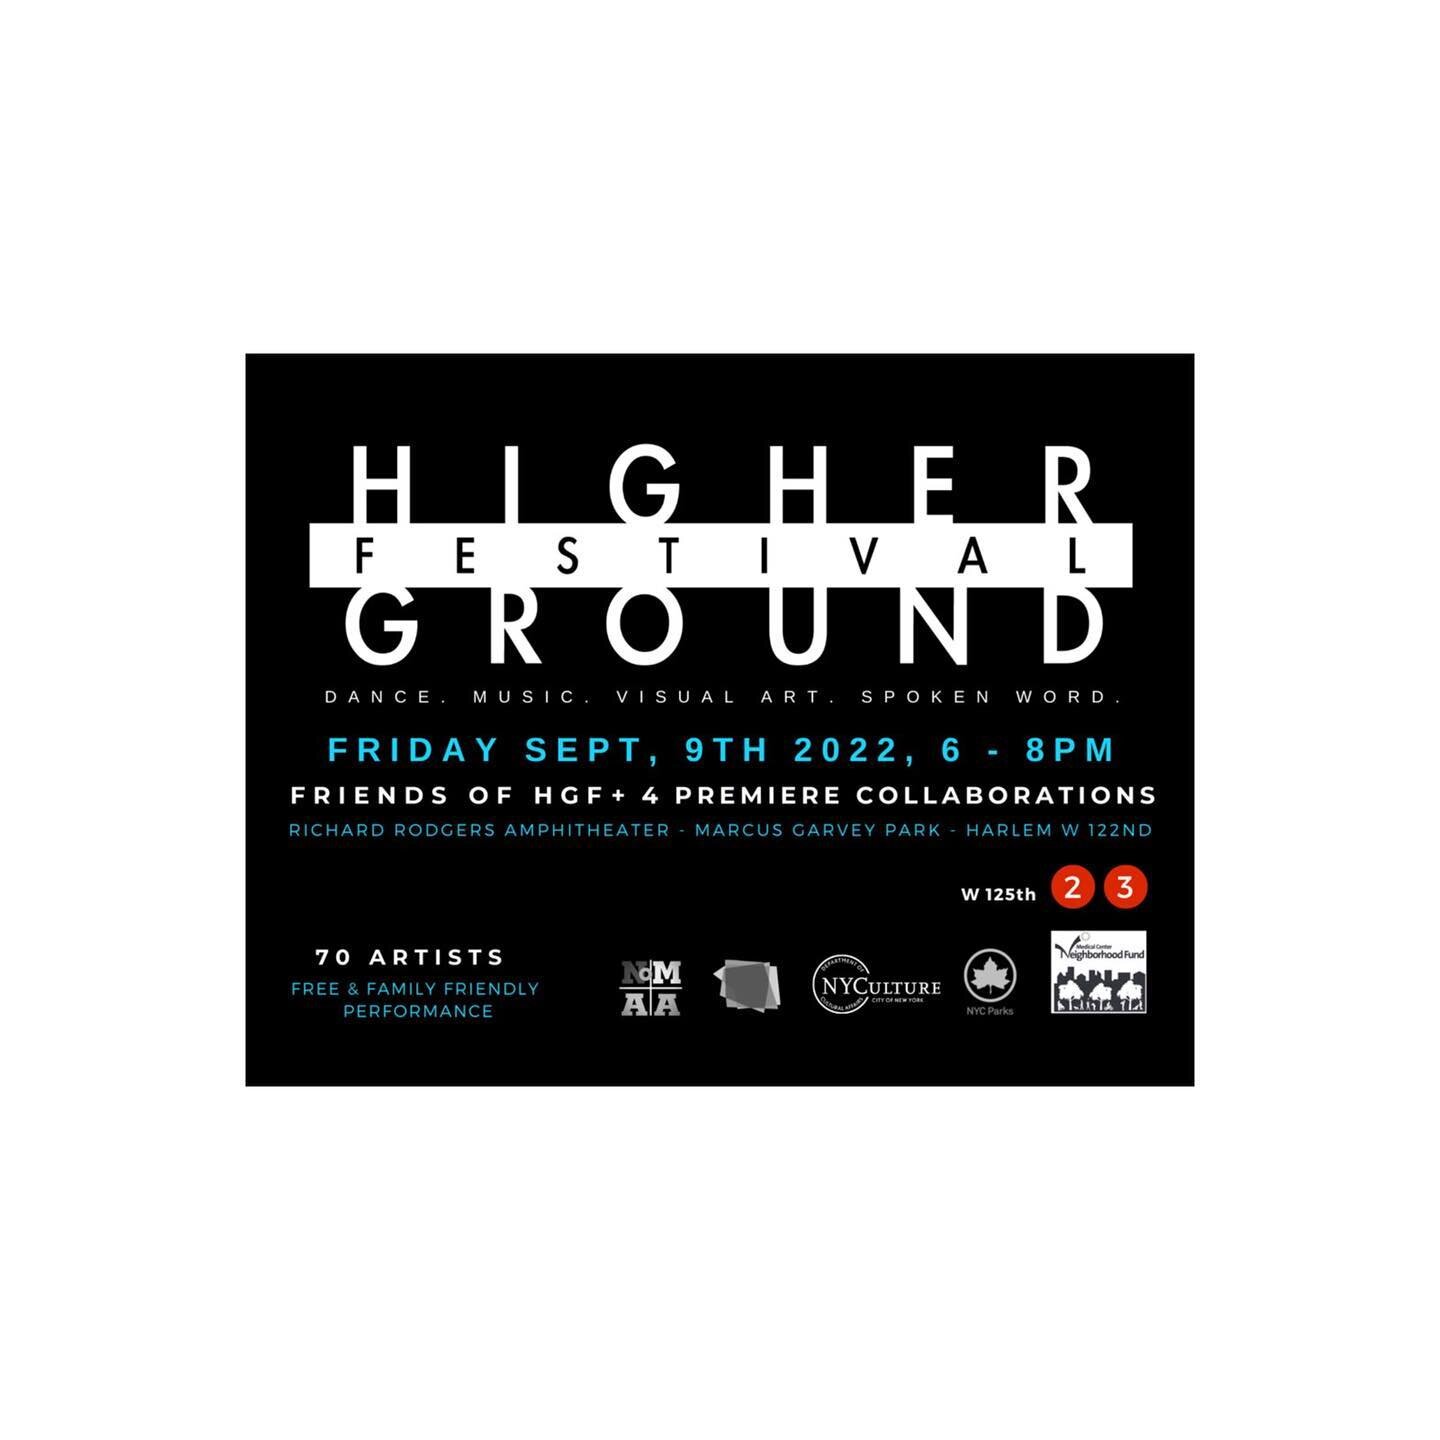 Higher Ground Festival // September 9 // 6-8pm // Richard Rodgers Amphitheater, Marcus Garvey Park, New York, NY

in collaboration with @donniewelchpoetry 

presenting new stage work (first time in 2 years) thanks to -
@kellyntate 
@colinminigan 
@hi